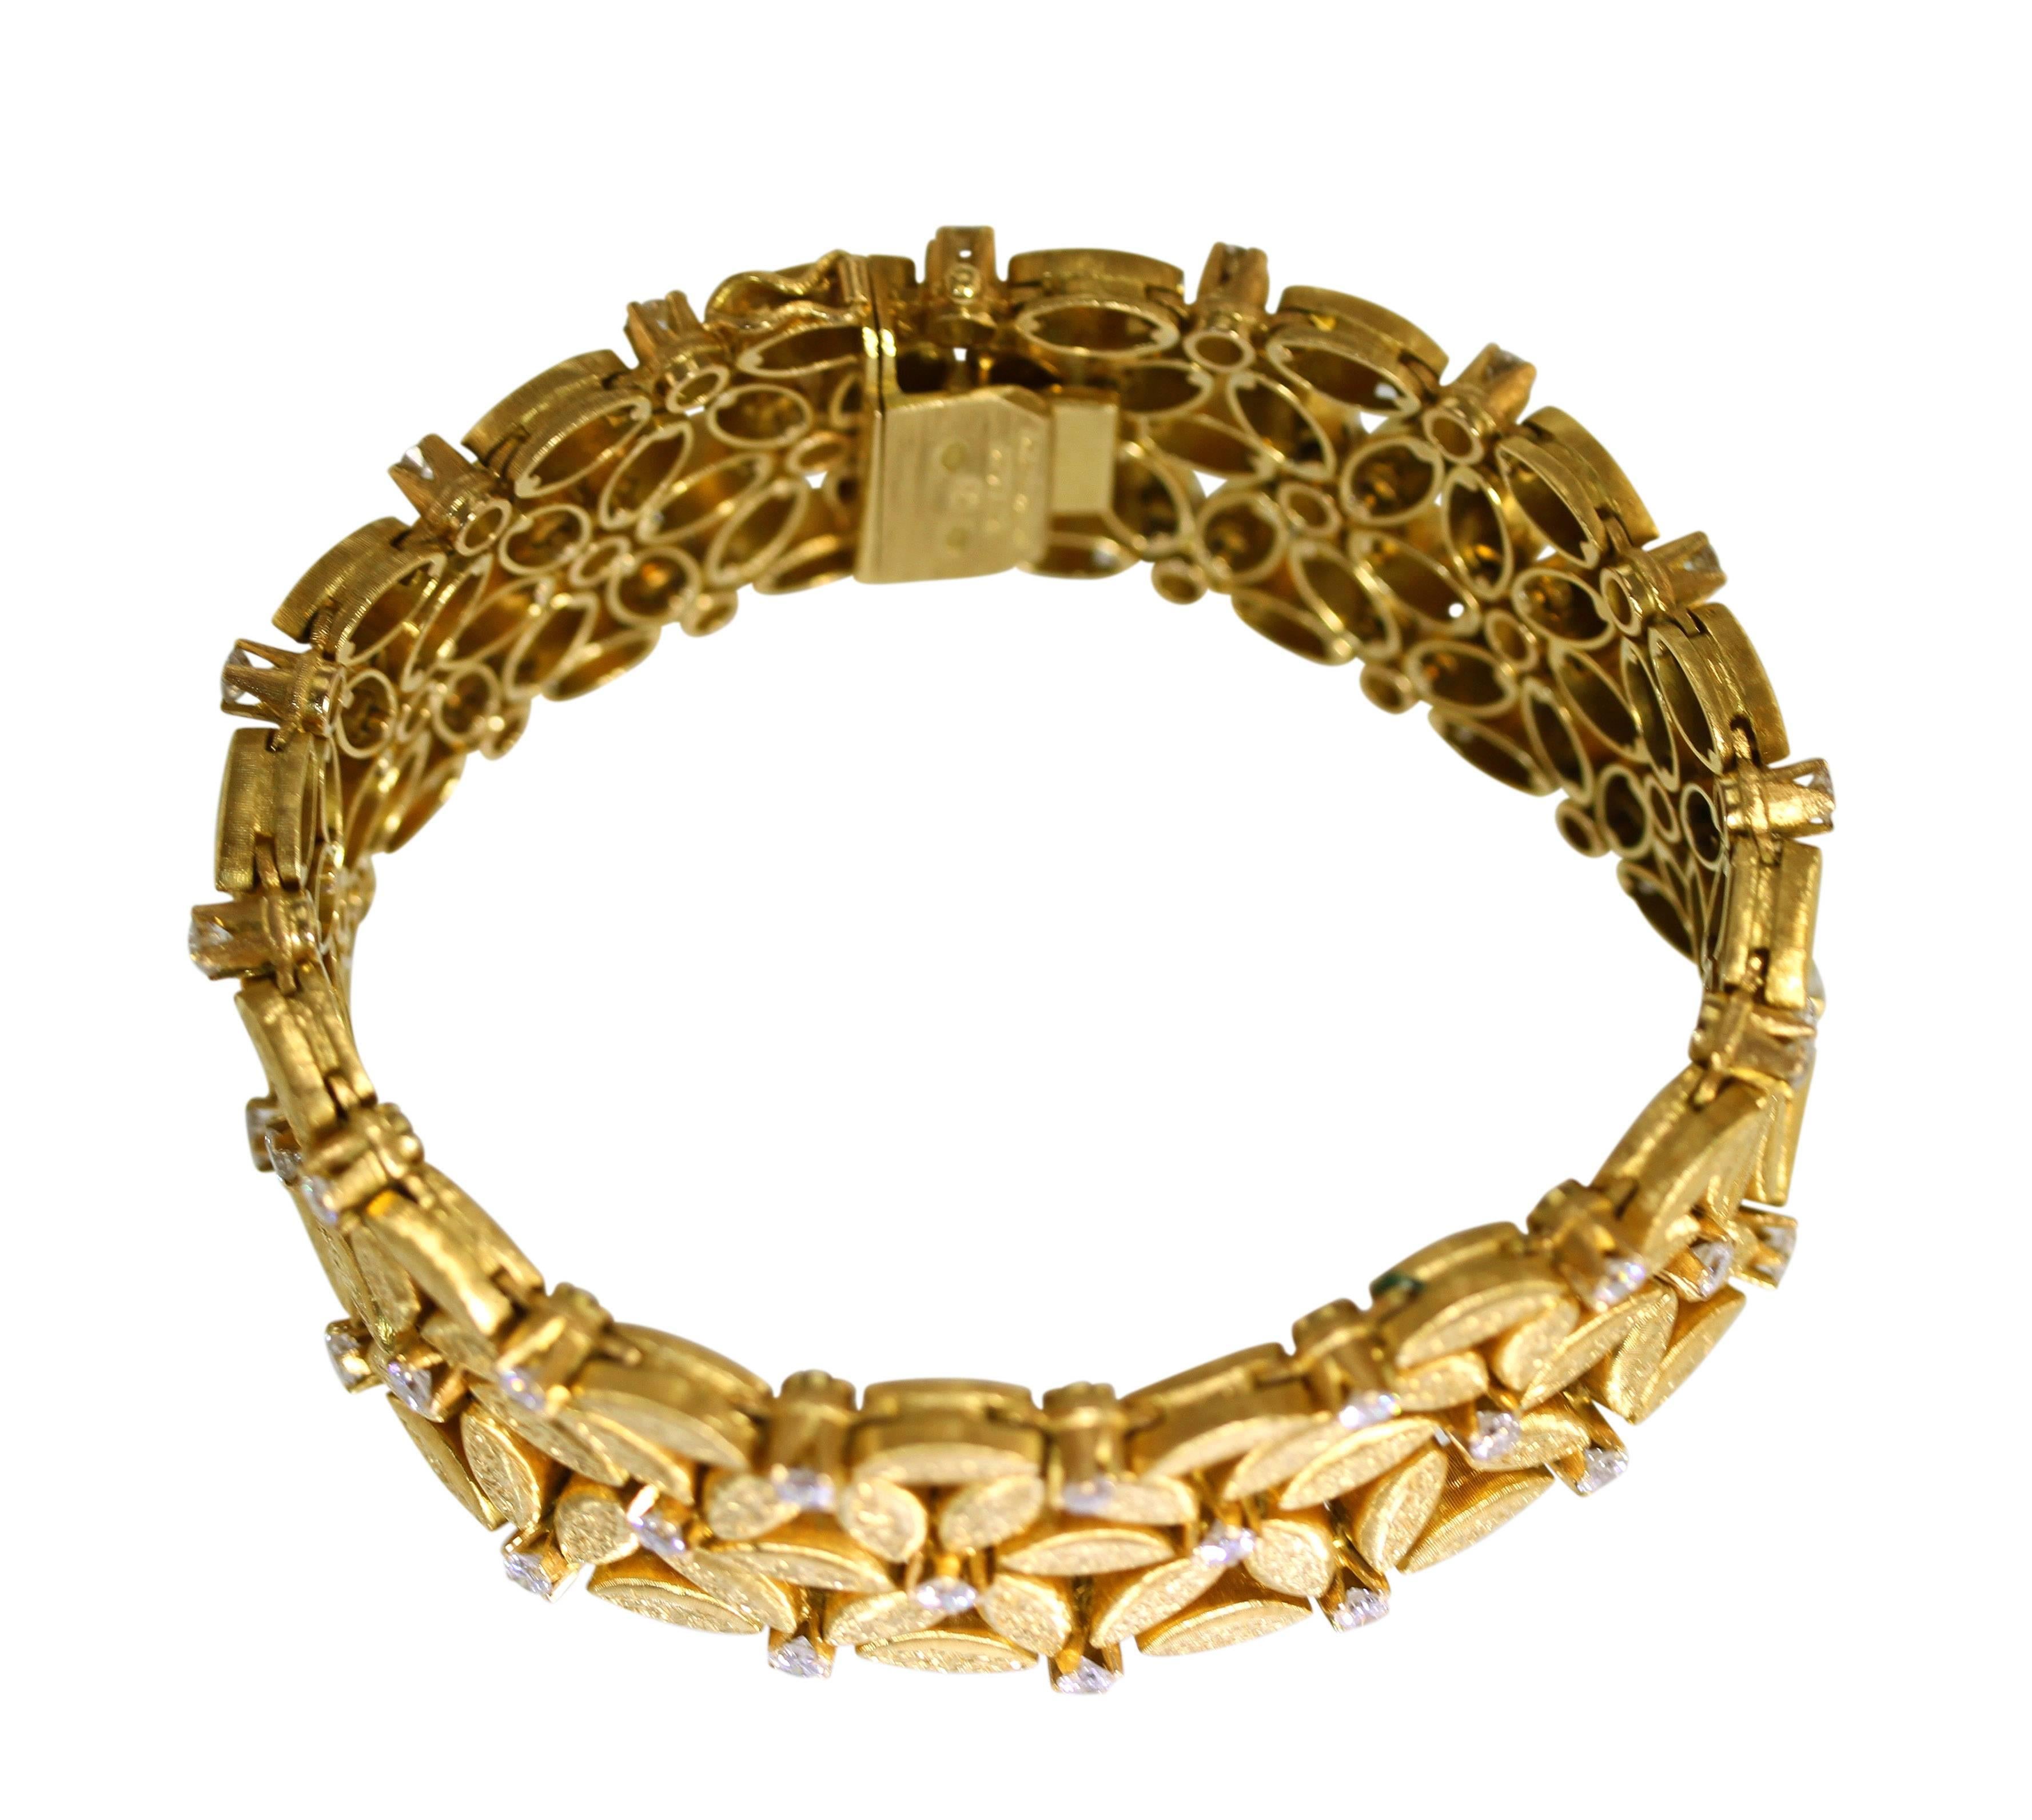 This bracelets lays beautifully on the wrist. An 18 karat gold and diamond link bracelet by Buccellati, Italy, circa 1960, of floral lattice design composed of a series of texture gold petal links connected by 48 bezel-set diamonds weighing